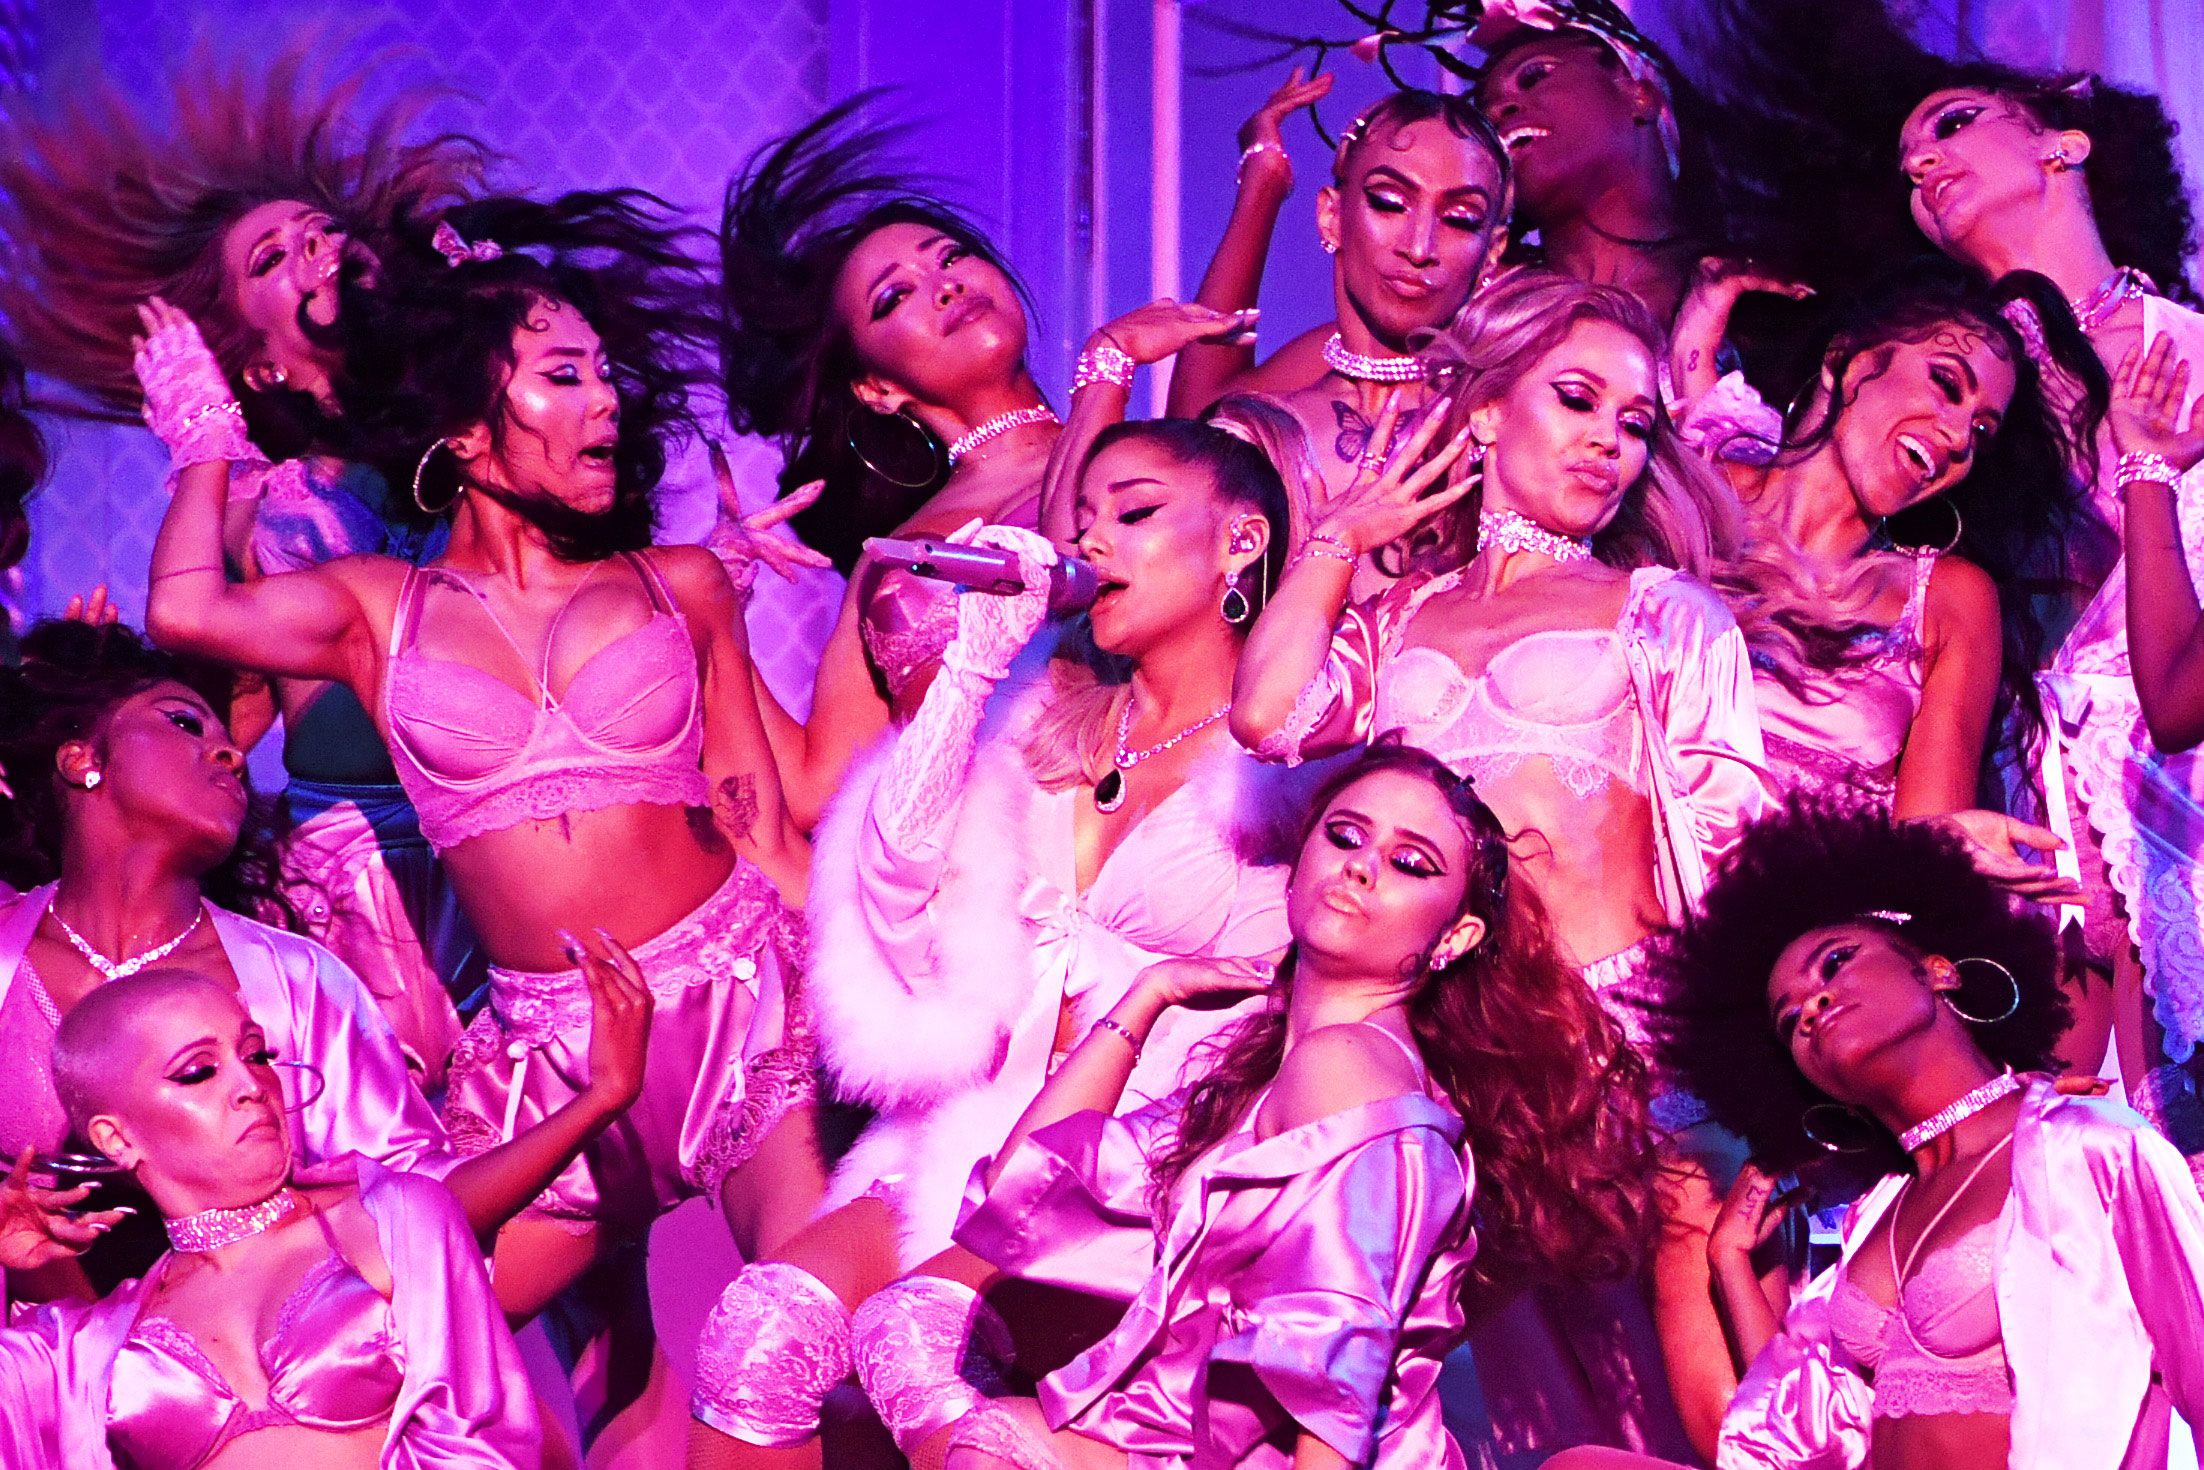 Ariana Grande: “7 Rings” Track Review | Pitchfork